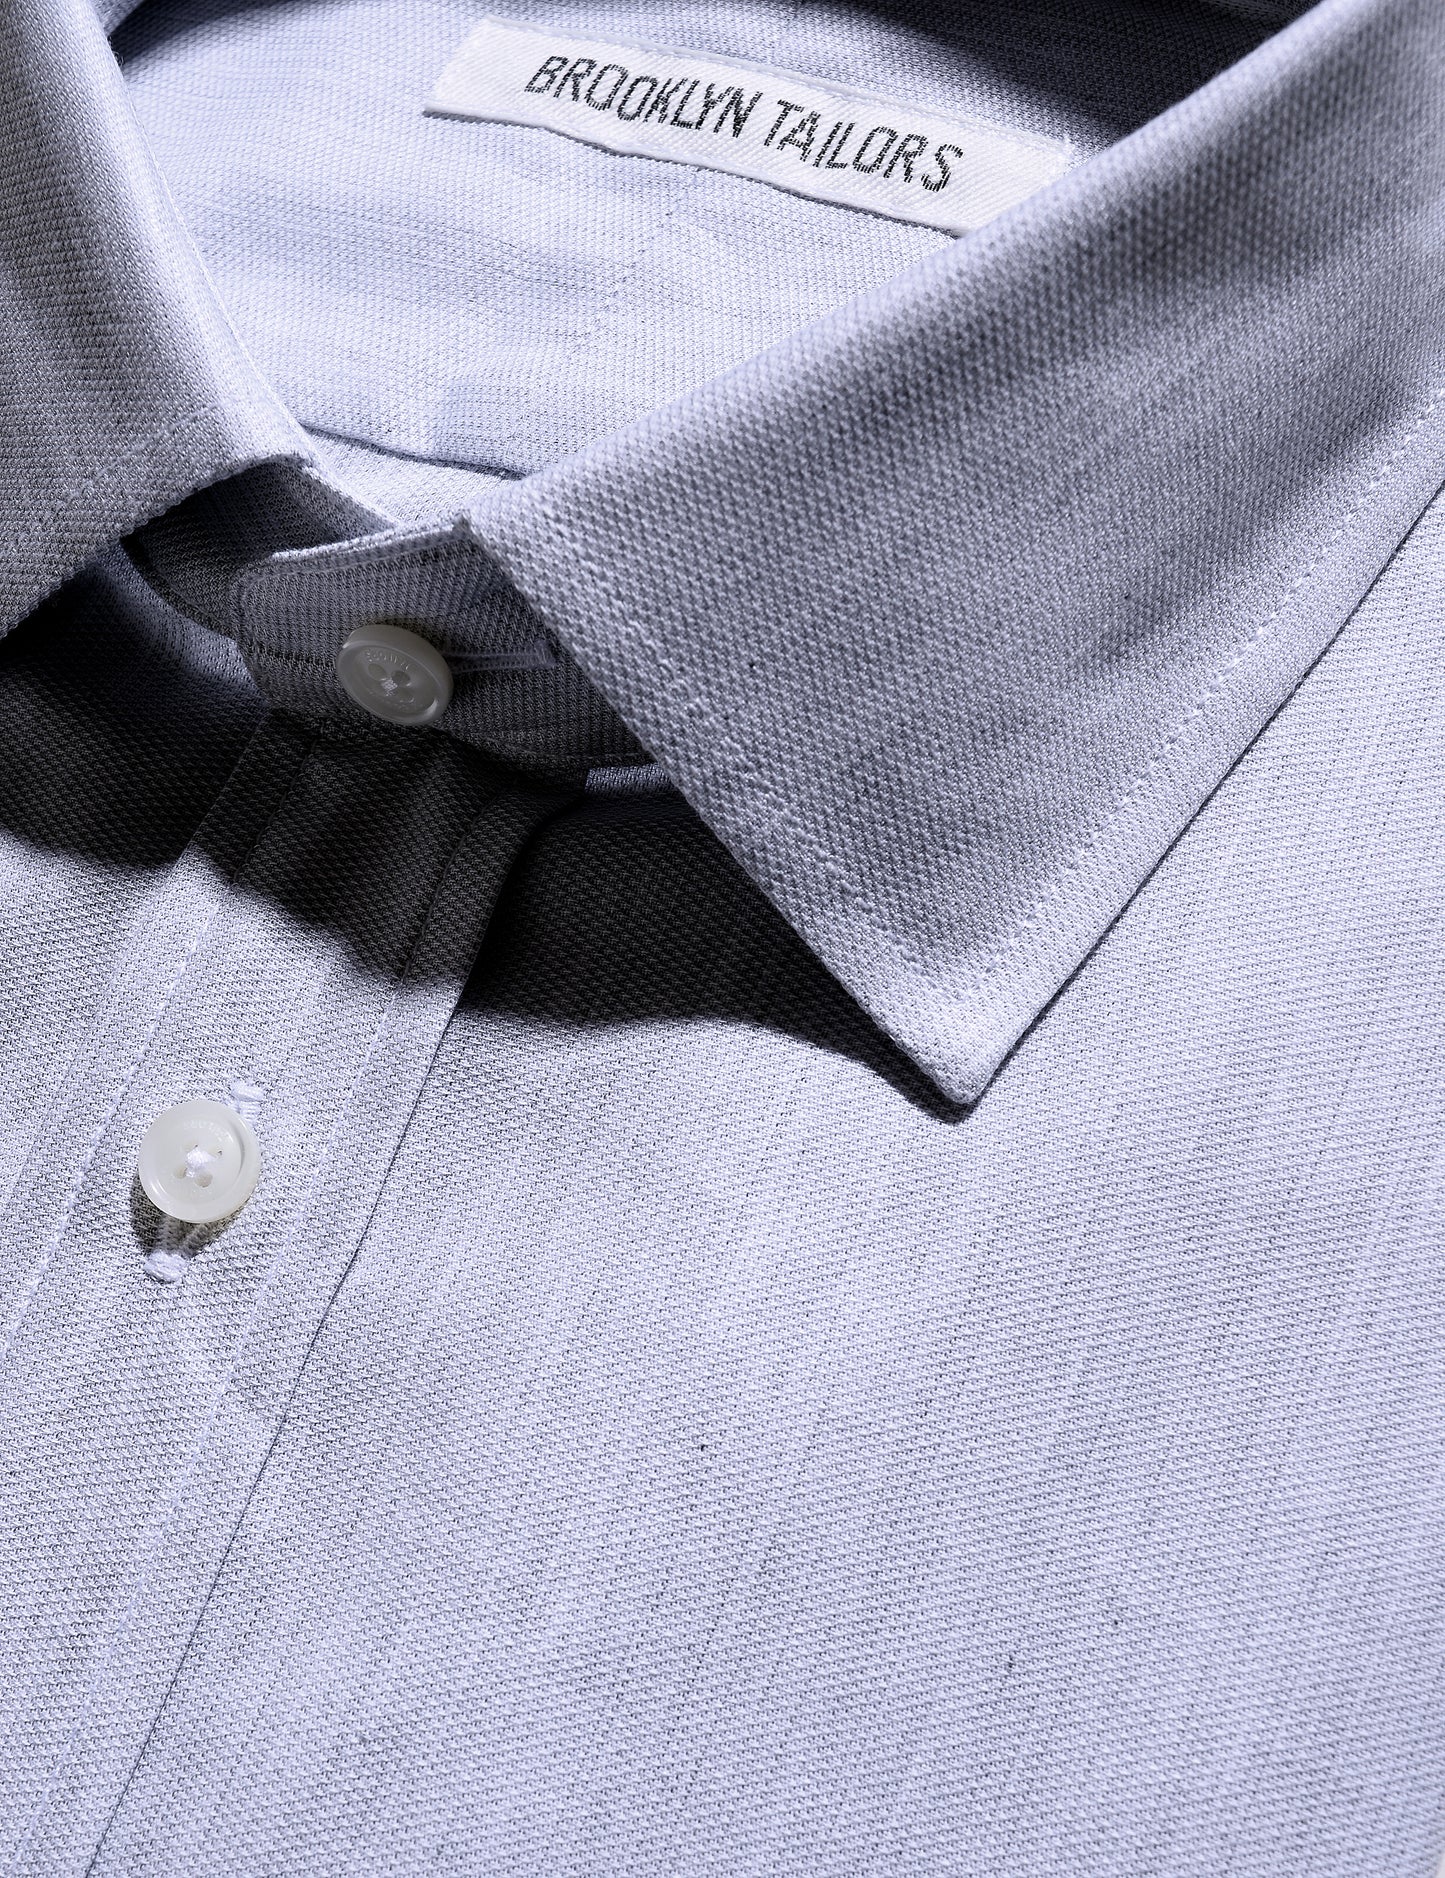 Detail shot of collar and fabric texture on Brooklyn Tailors BKT20 Slim Dress Shirt in Cotton Basketweave - Fog